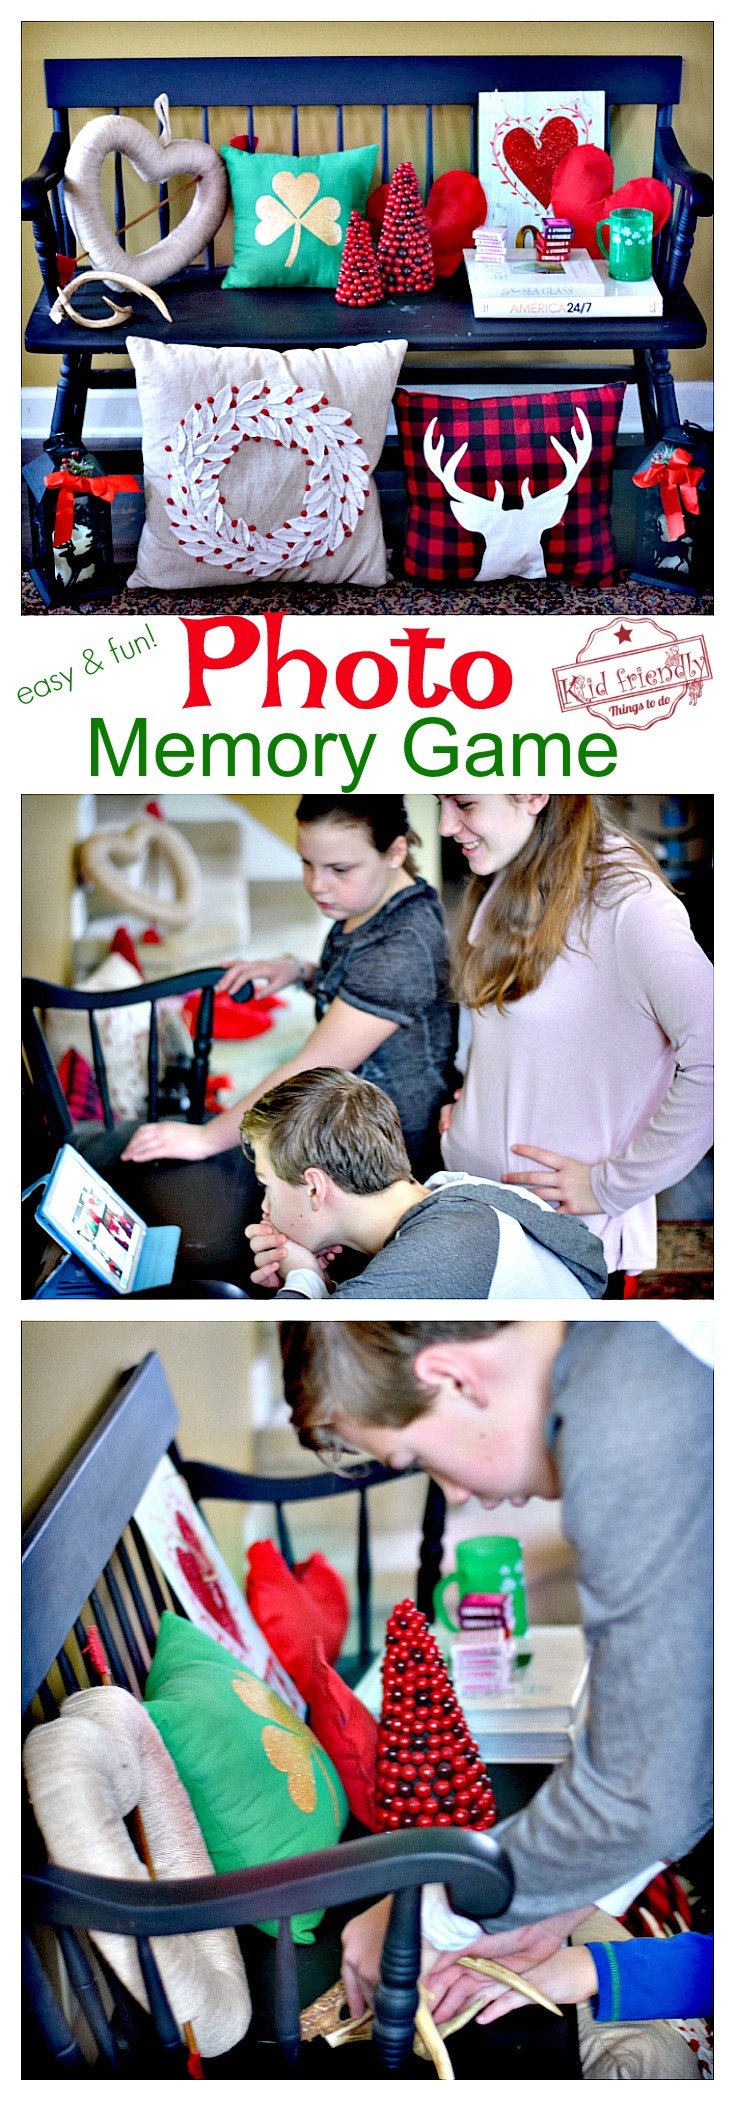 Photo Memory Game for Kids, Teens & Adults! My family LOVES this game! Fun CHEAP & Easy Game For All - Teams have to work together to win! Perfect anytime or for any holiday - Valentine's Day, Easter, Christmas, Halloween, Thanksgiving...Great family game to play together. www.kidfriendlythingstodo.com 